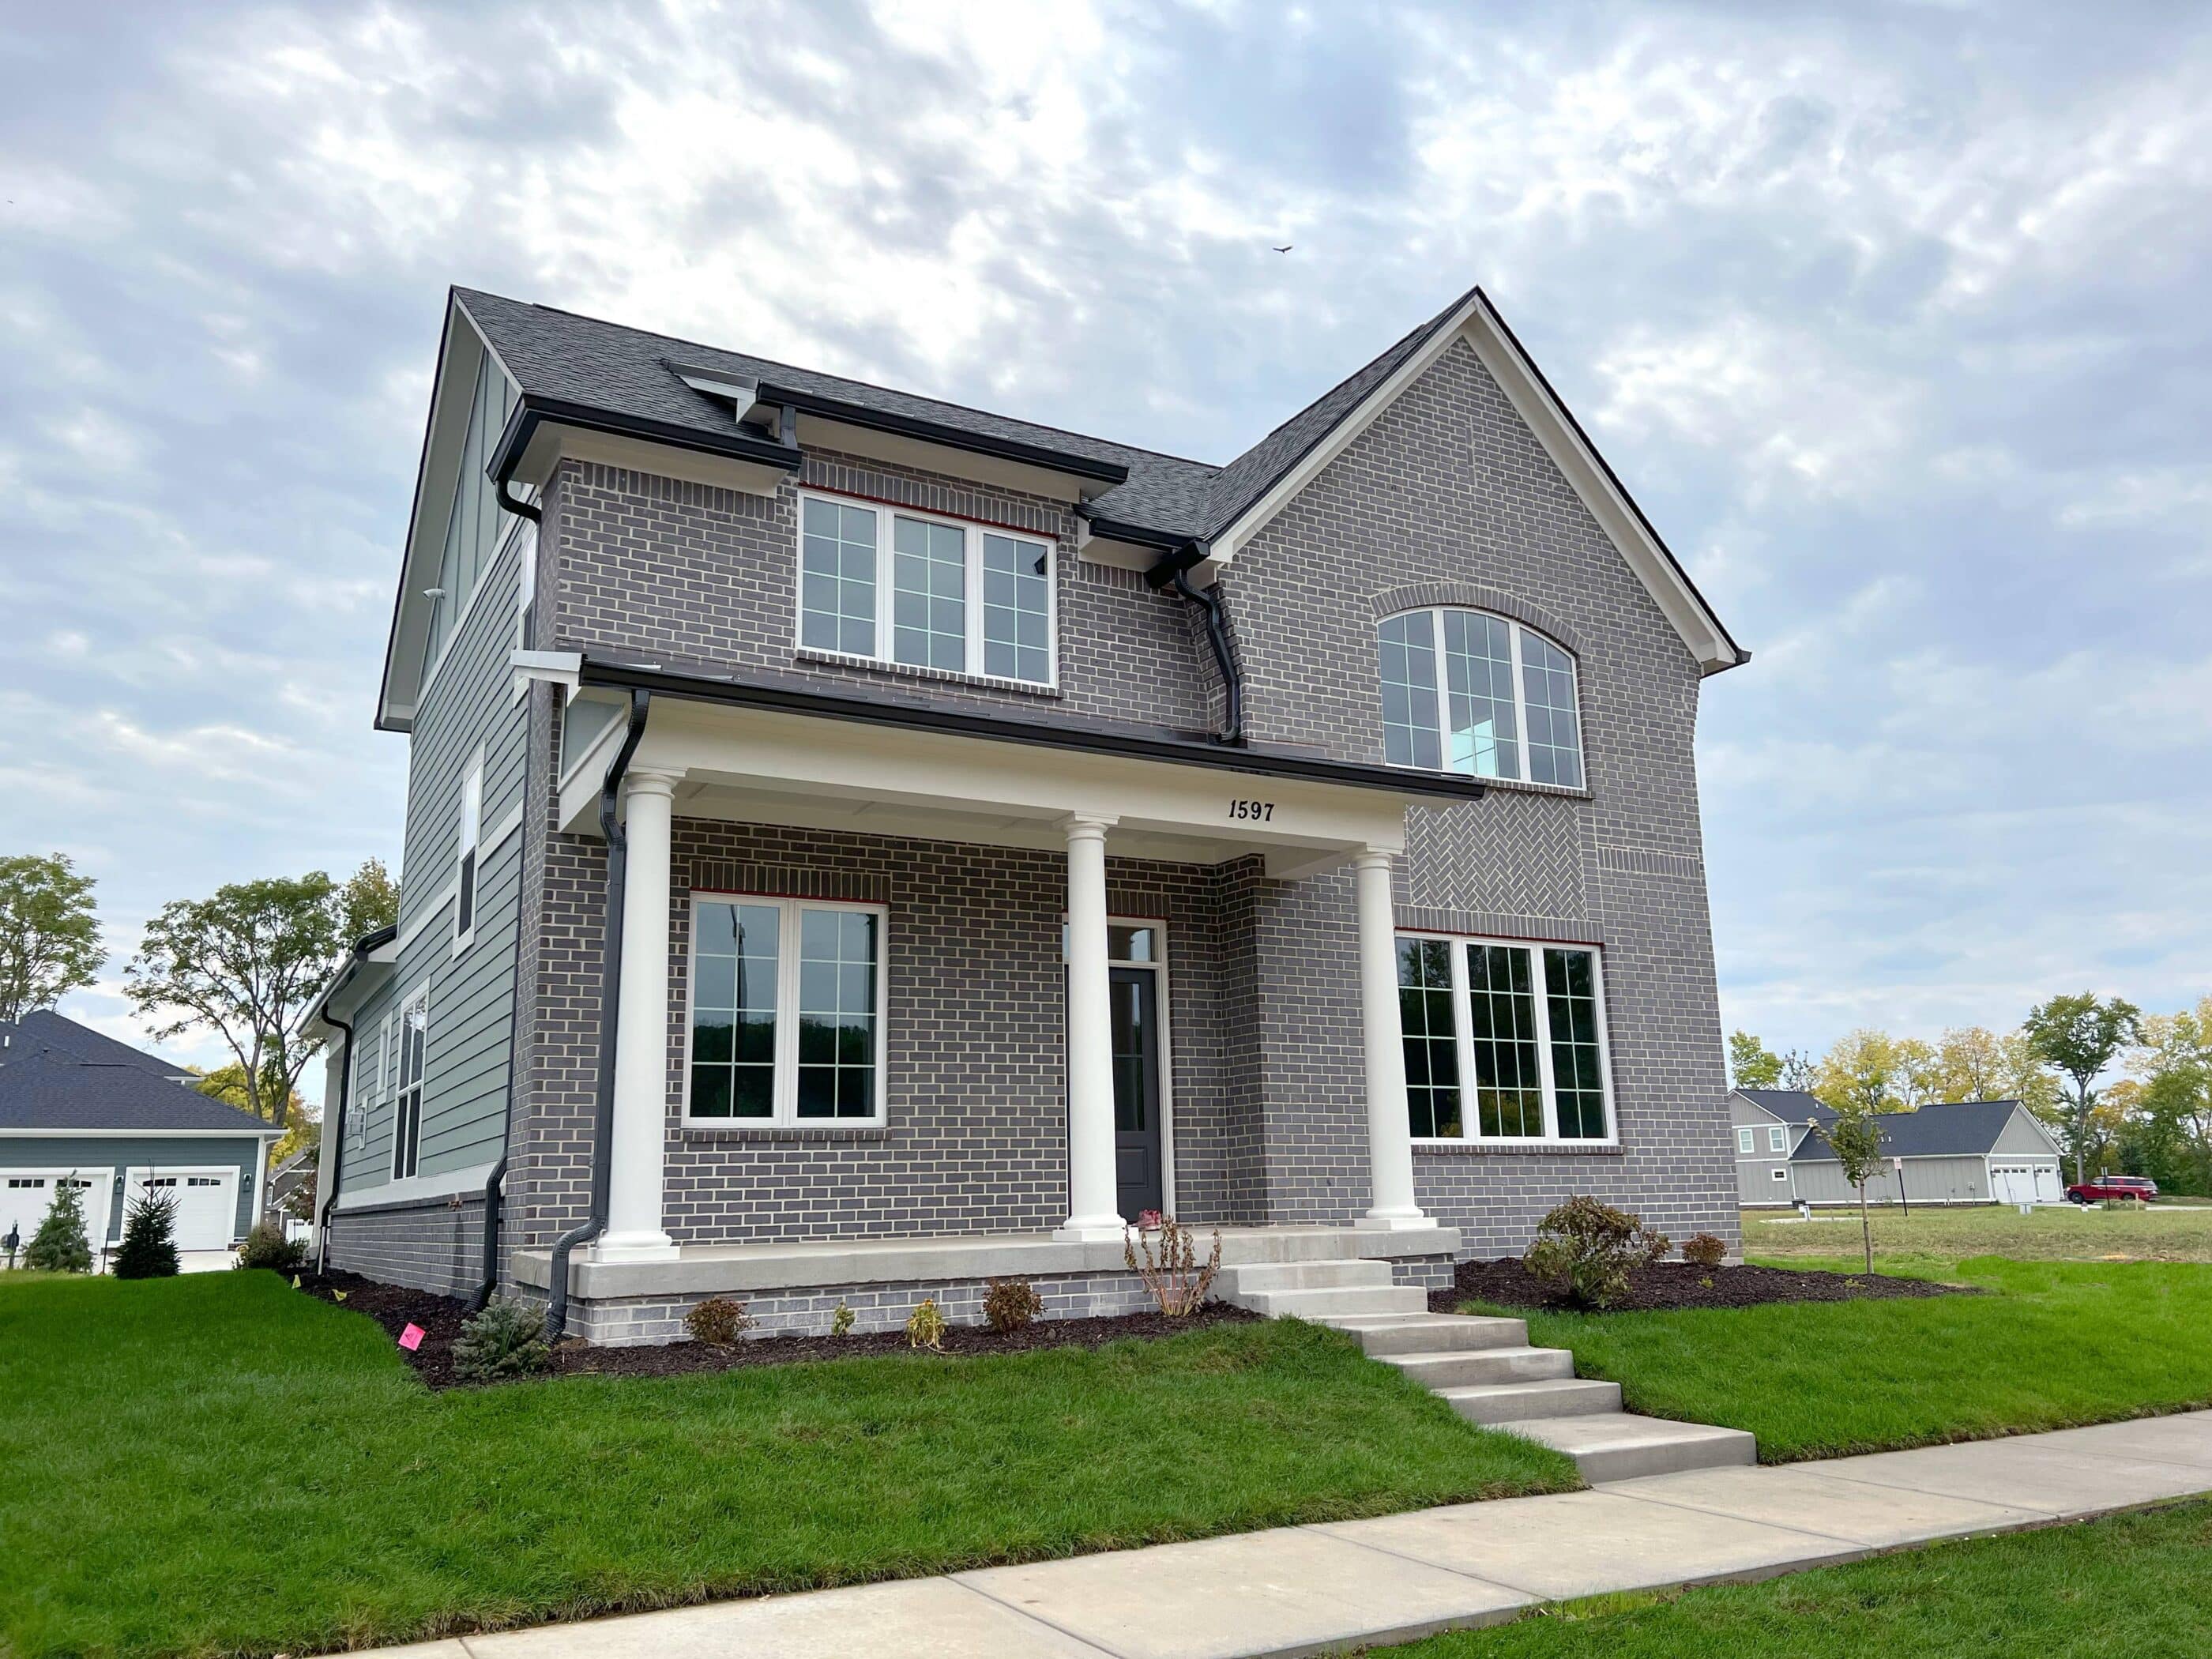 A luxury custom home in Westfield, Indiana, featuring a gray exterior with white trim and a charming front porch.